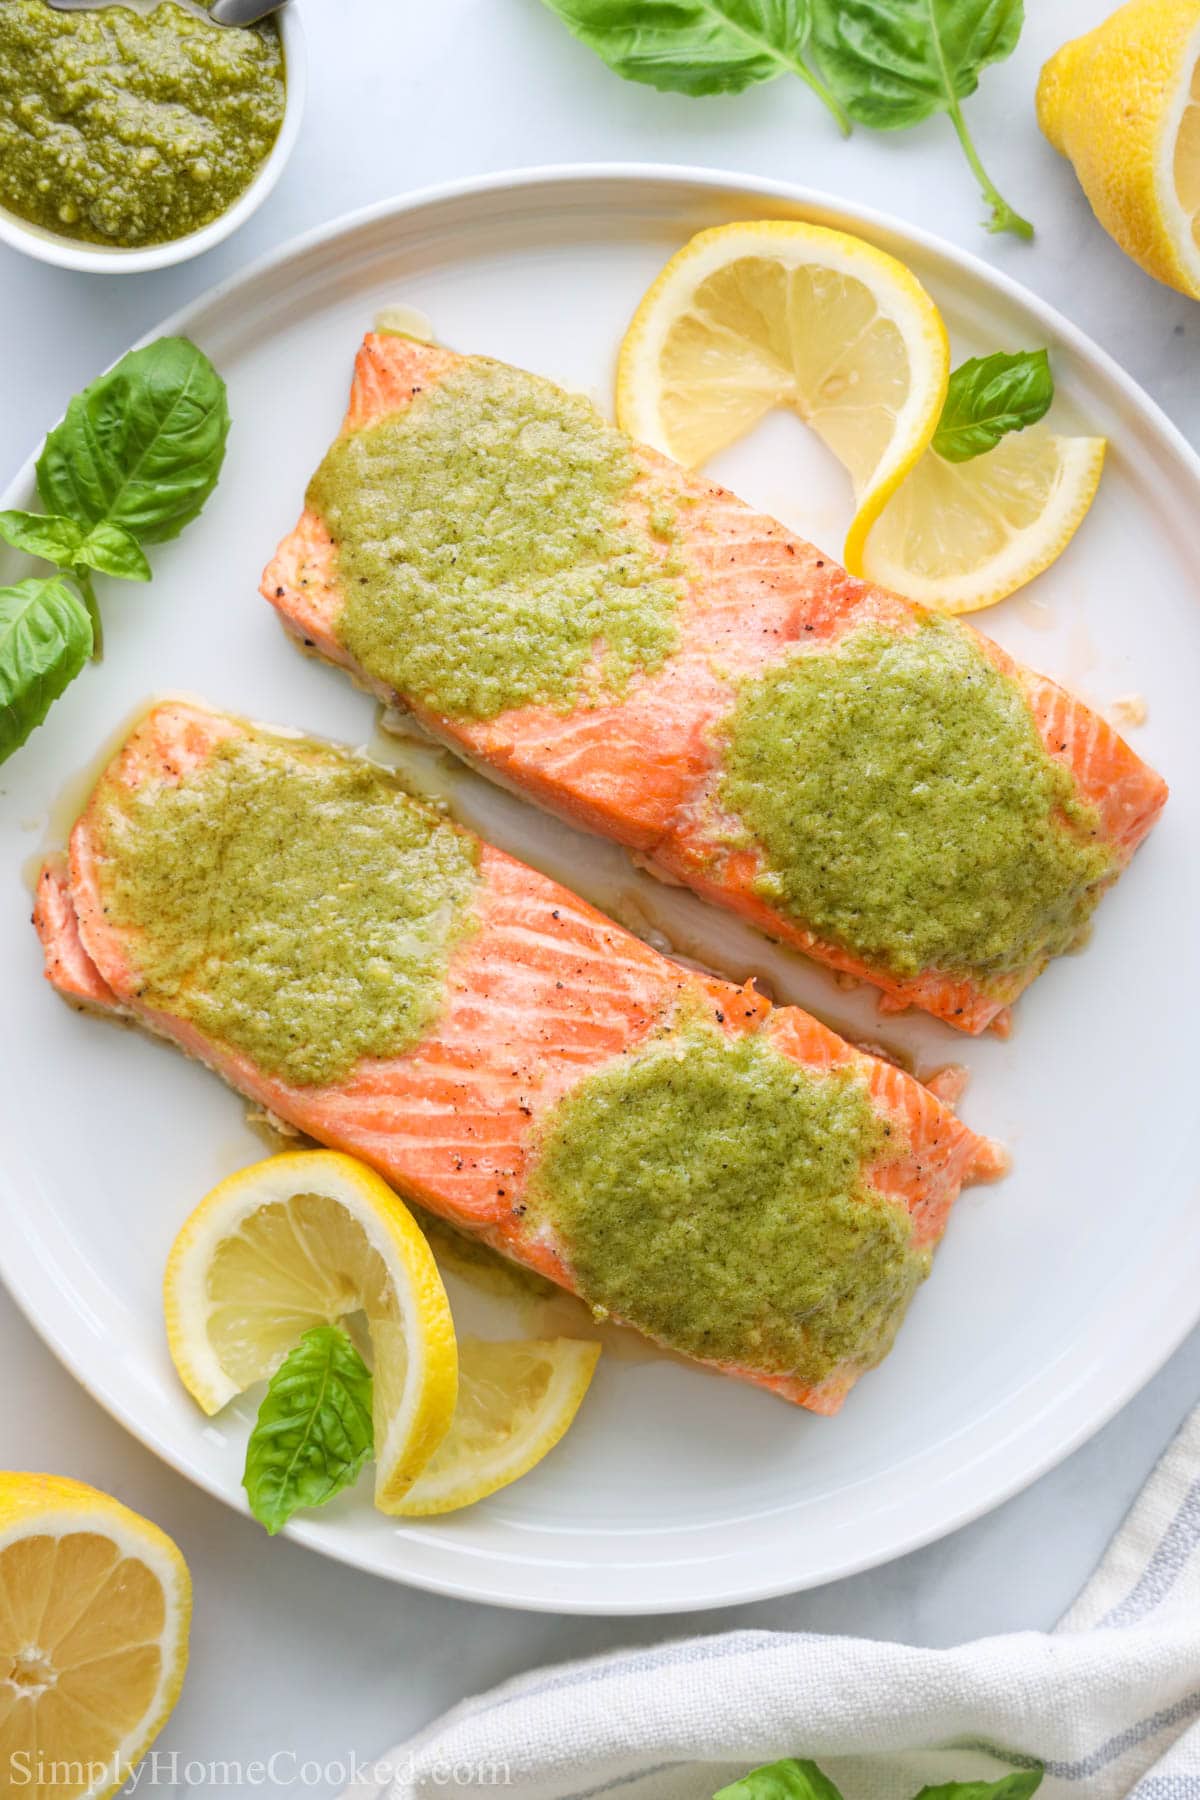 Pesto Salmon filets on a white plate with basil and lemon slices